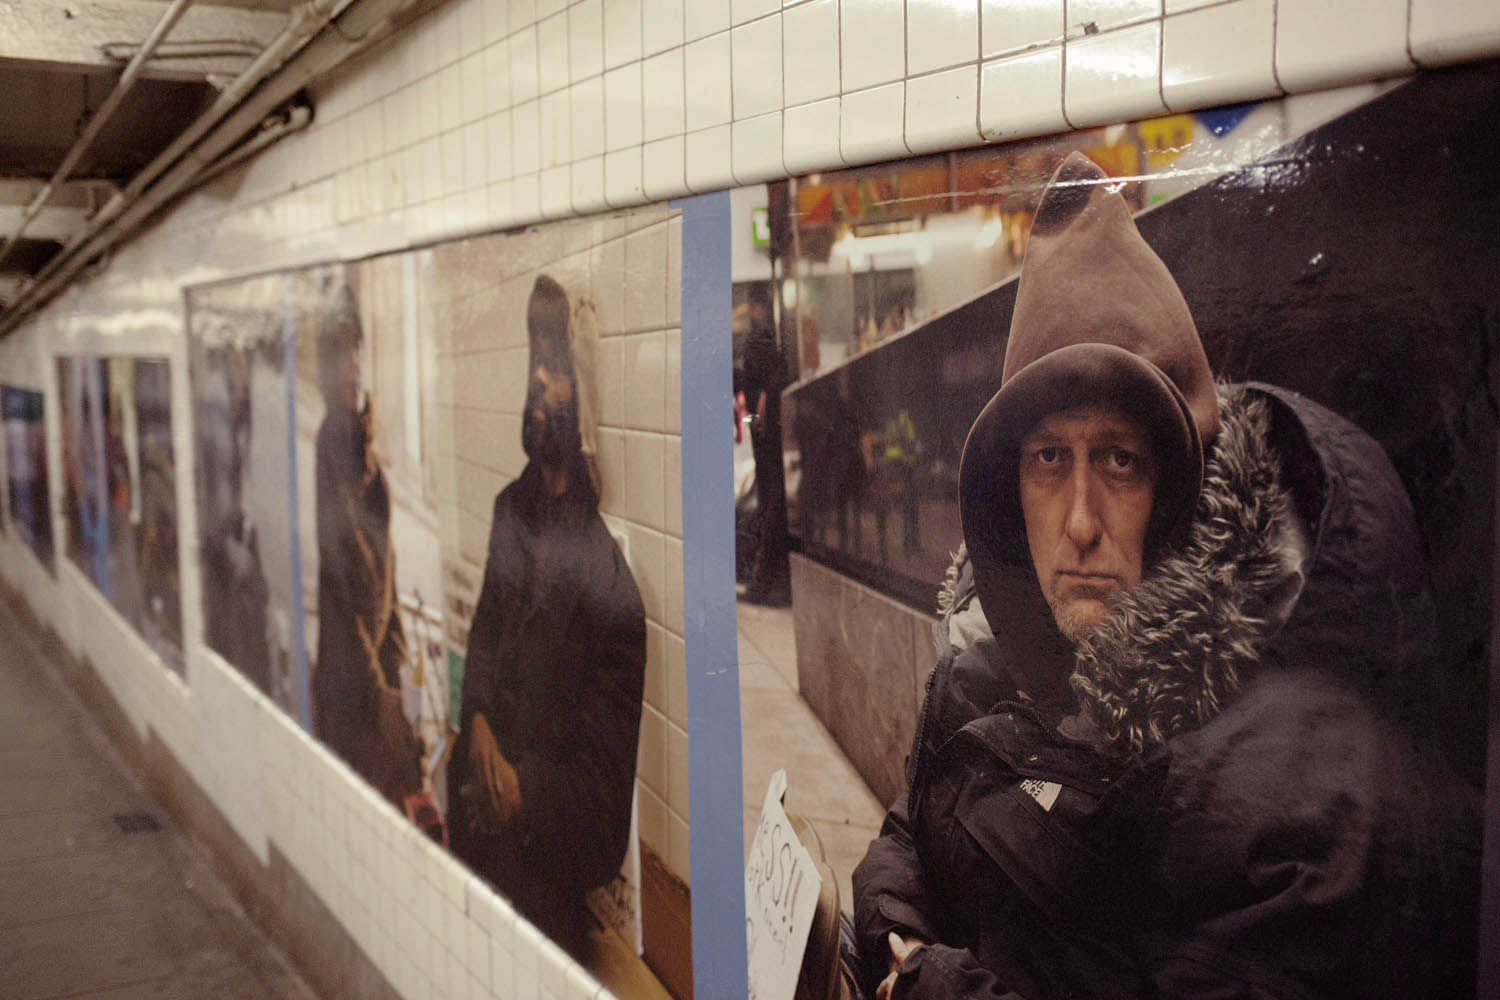 Artist, Andres Serrano's photographic installation, Residents of New York, at the West 4th Street subway  station in New York City.